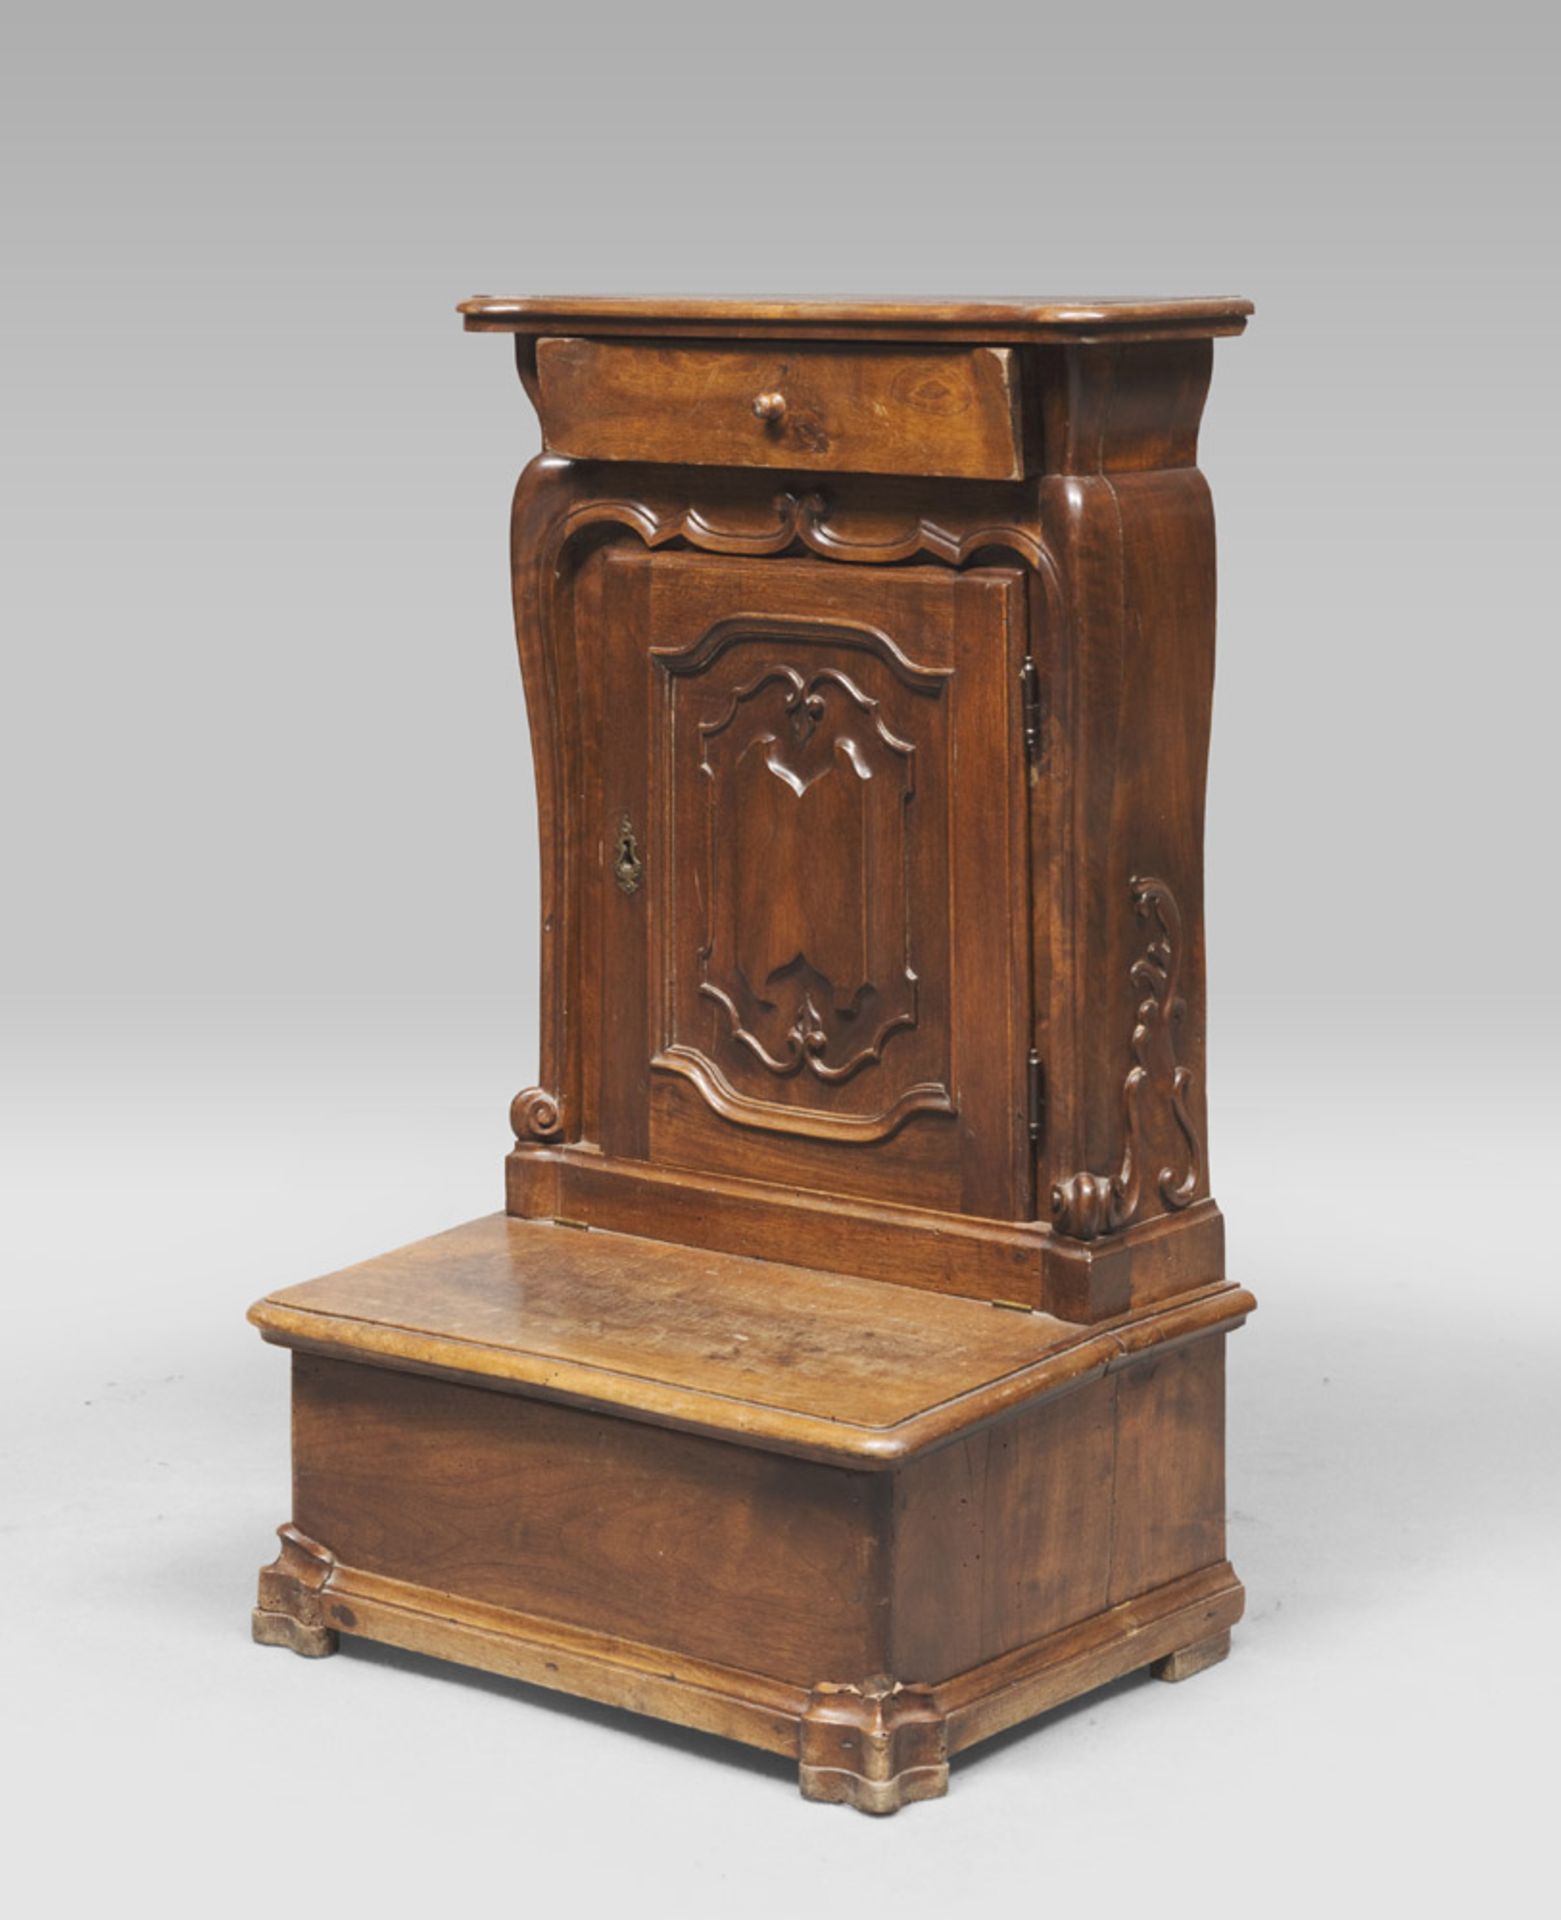 KNEELING-STOOL IN WALNUT-TREE, 18TH CENTURY With one door and one drawer. Measures cm. 92 x 58 x 42.